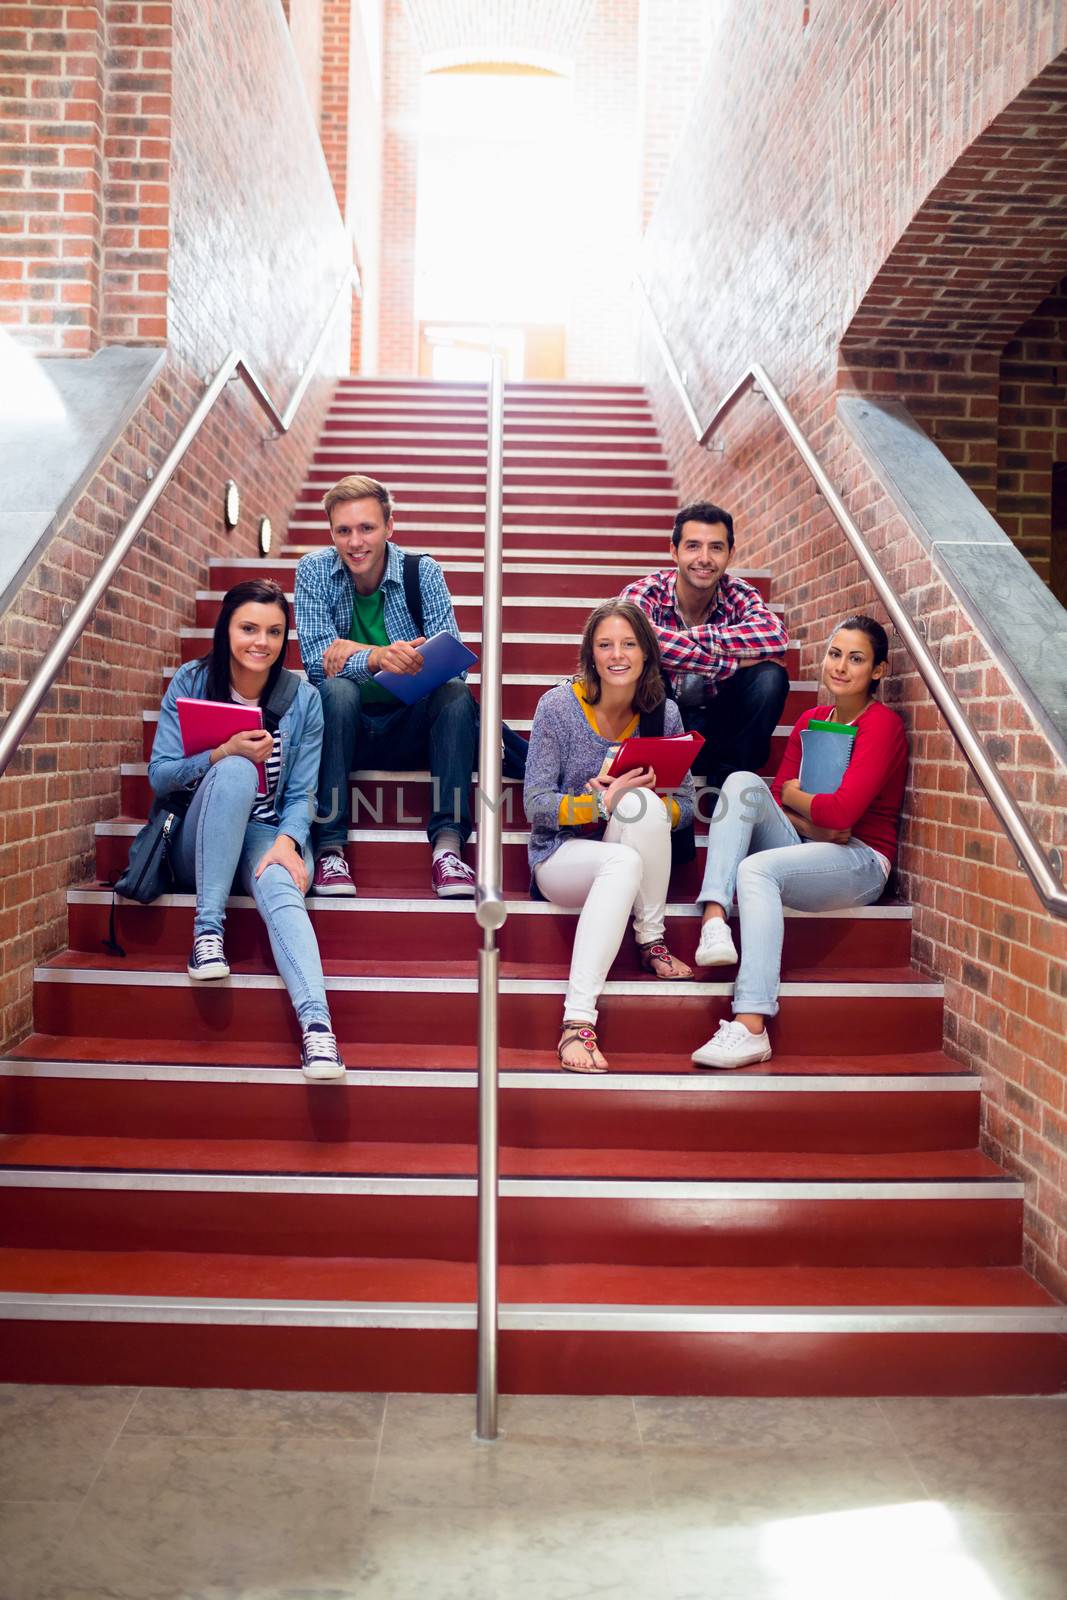 Group portrait of young college students sitting on stairs in the college